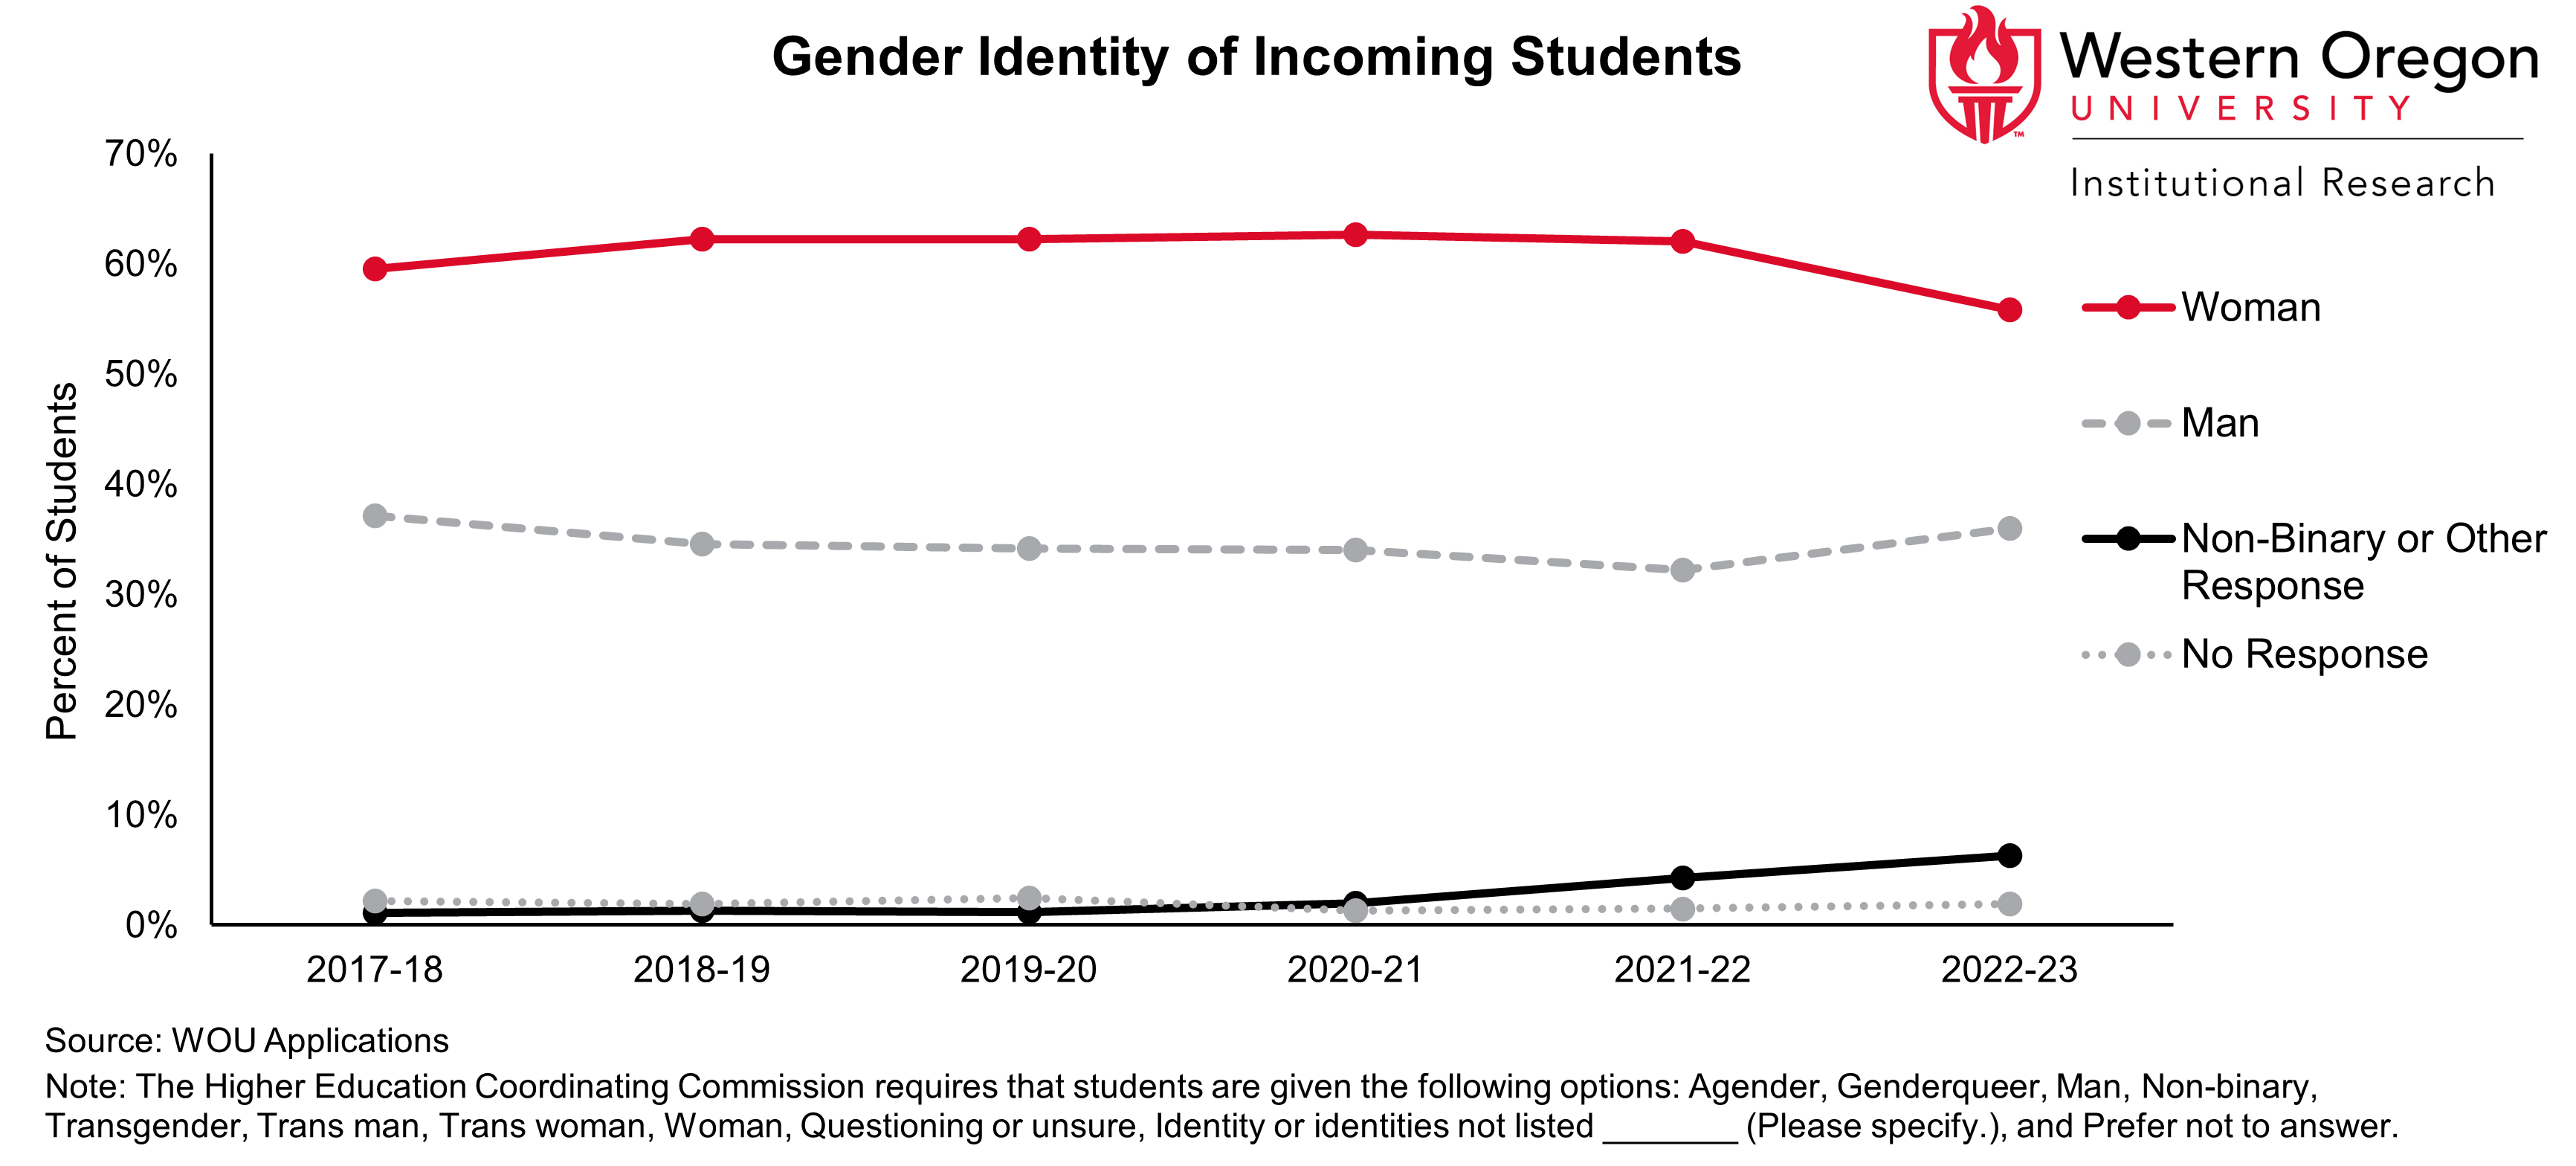 Line graph of the percentage of incoming students who identify as a man, a woman, or who have another gender identity. The percentage of students who do not indentify as a man or a woman has been increasing, and was approximately 6% in Fall 2022.